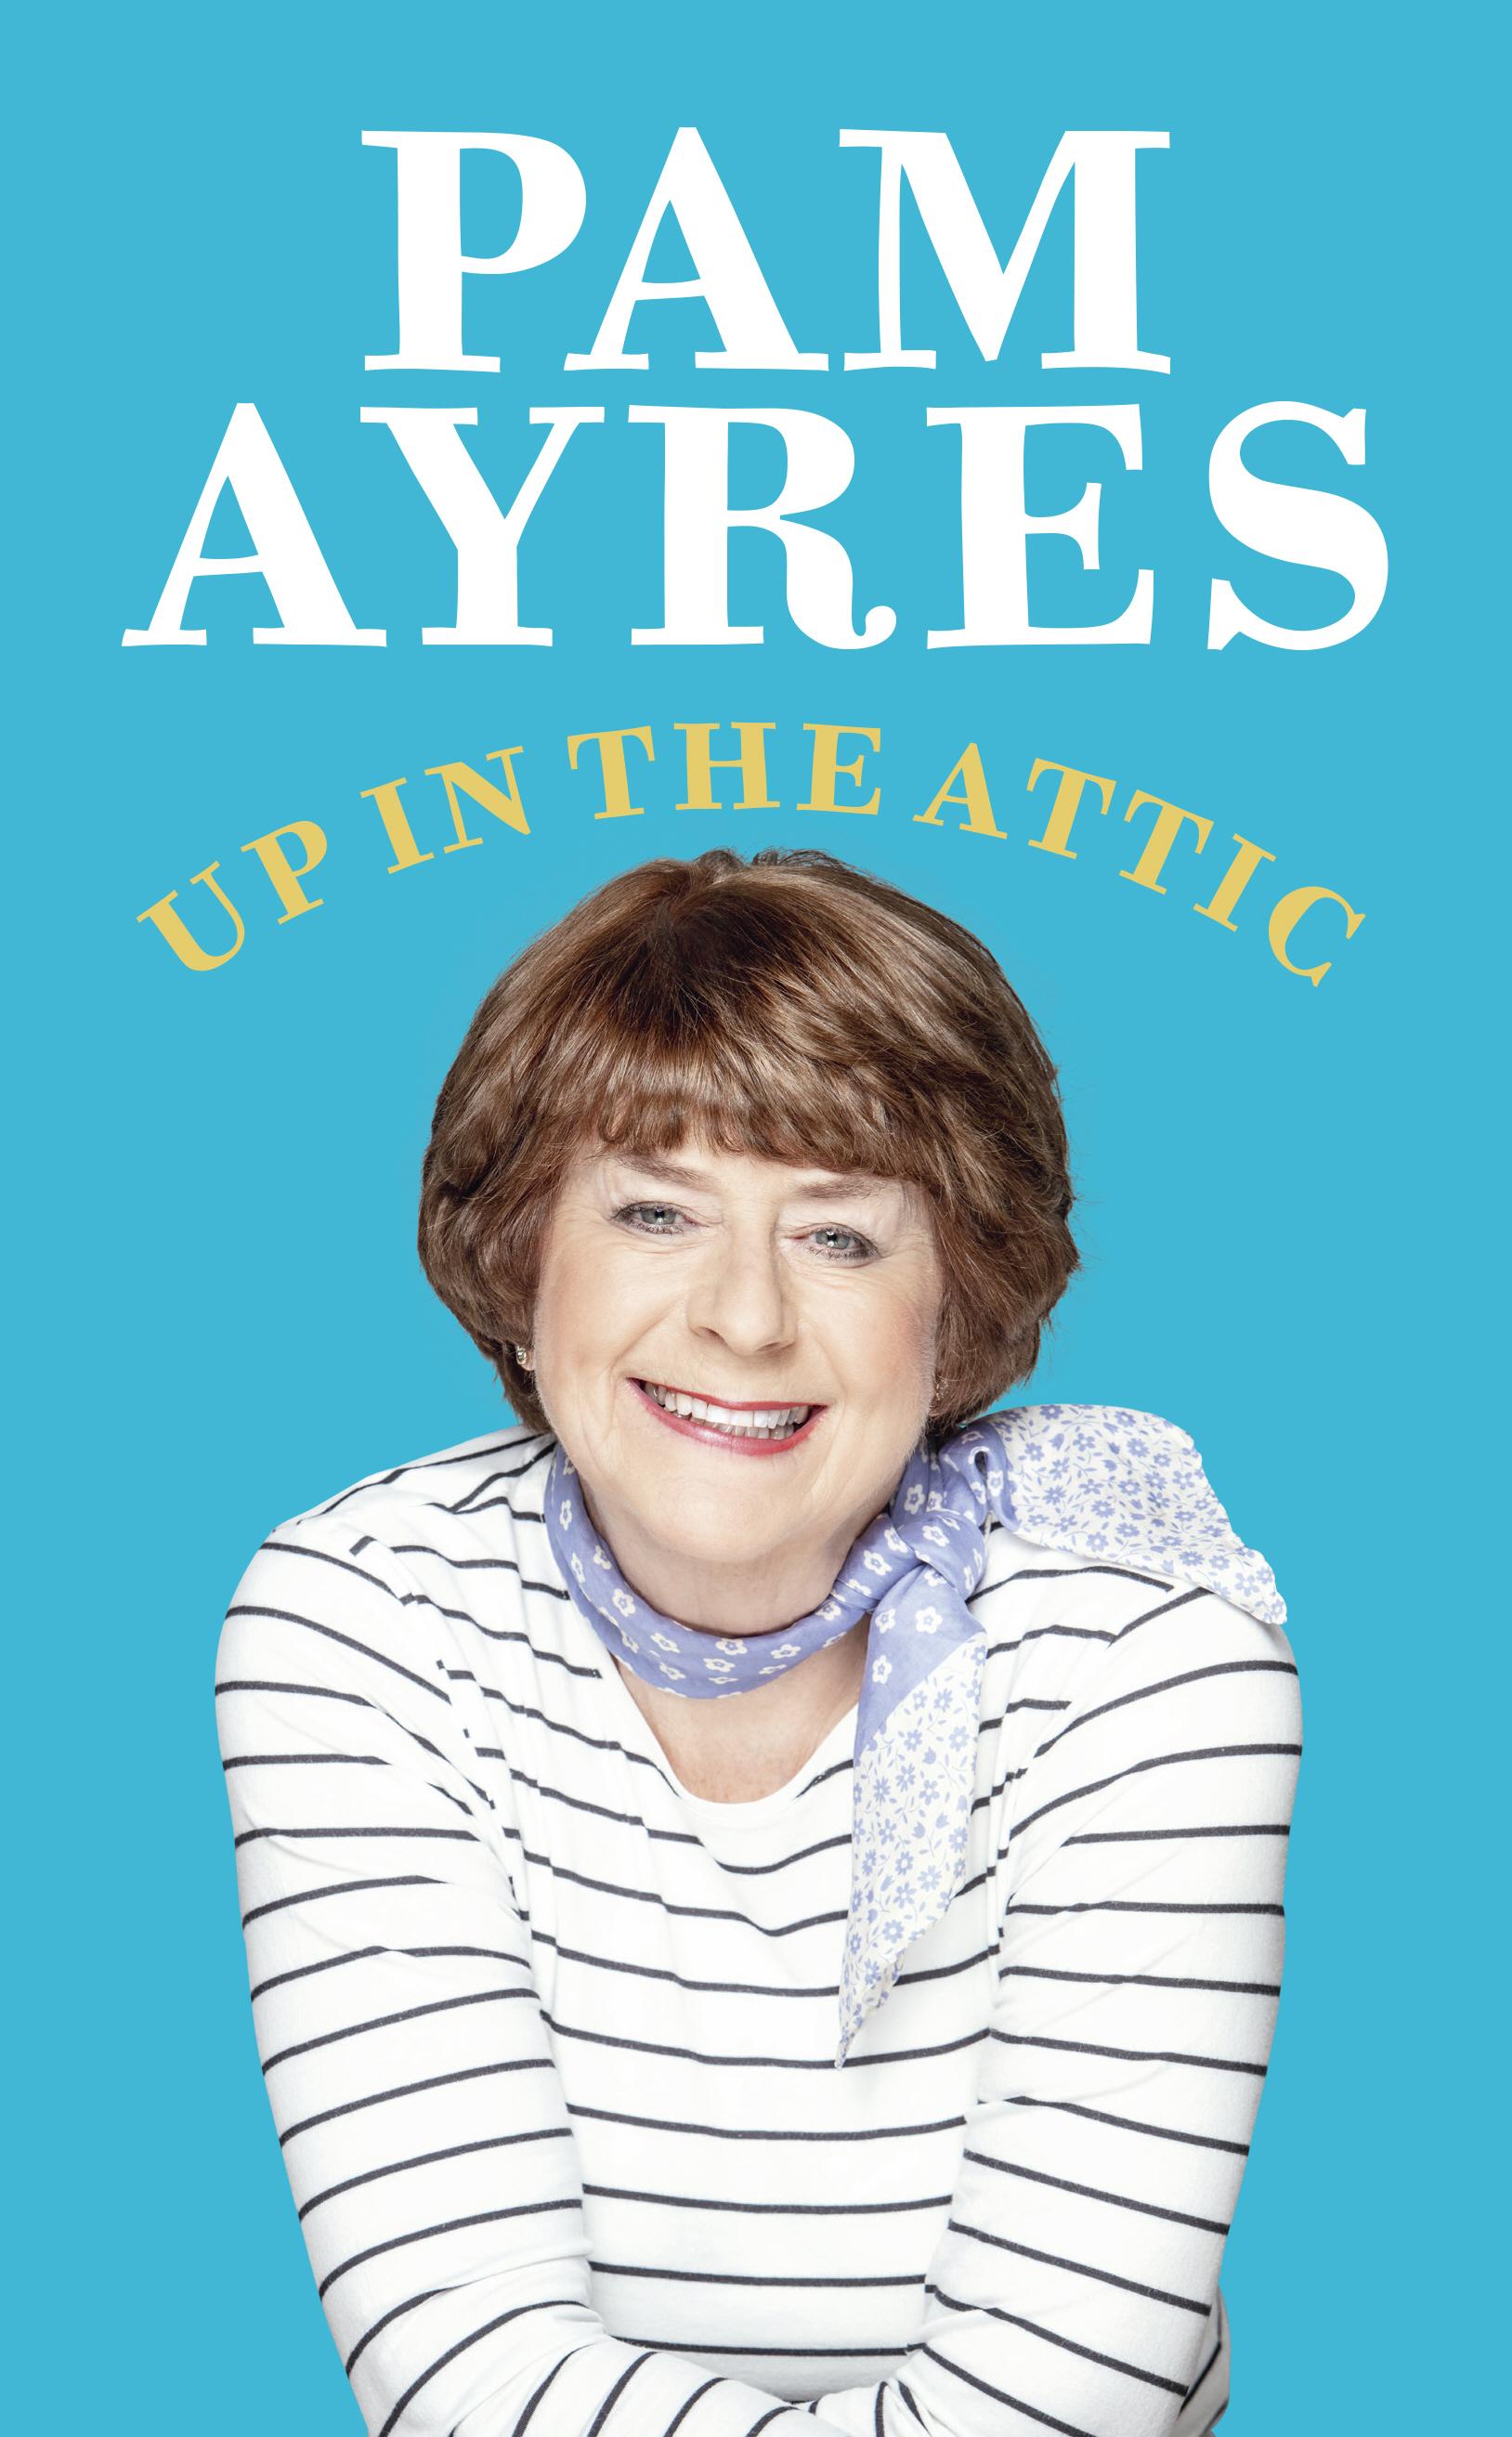 Up in the Attic - Pam Ayres